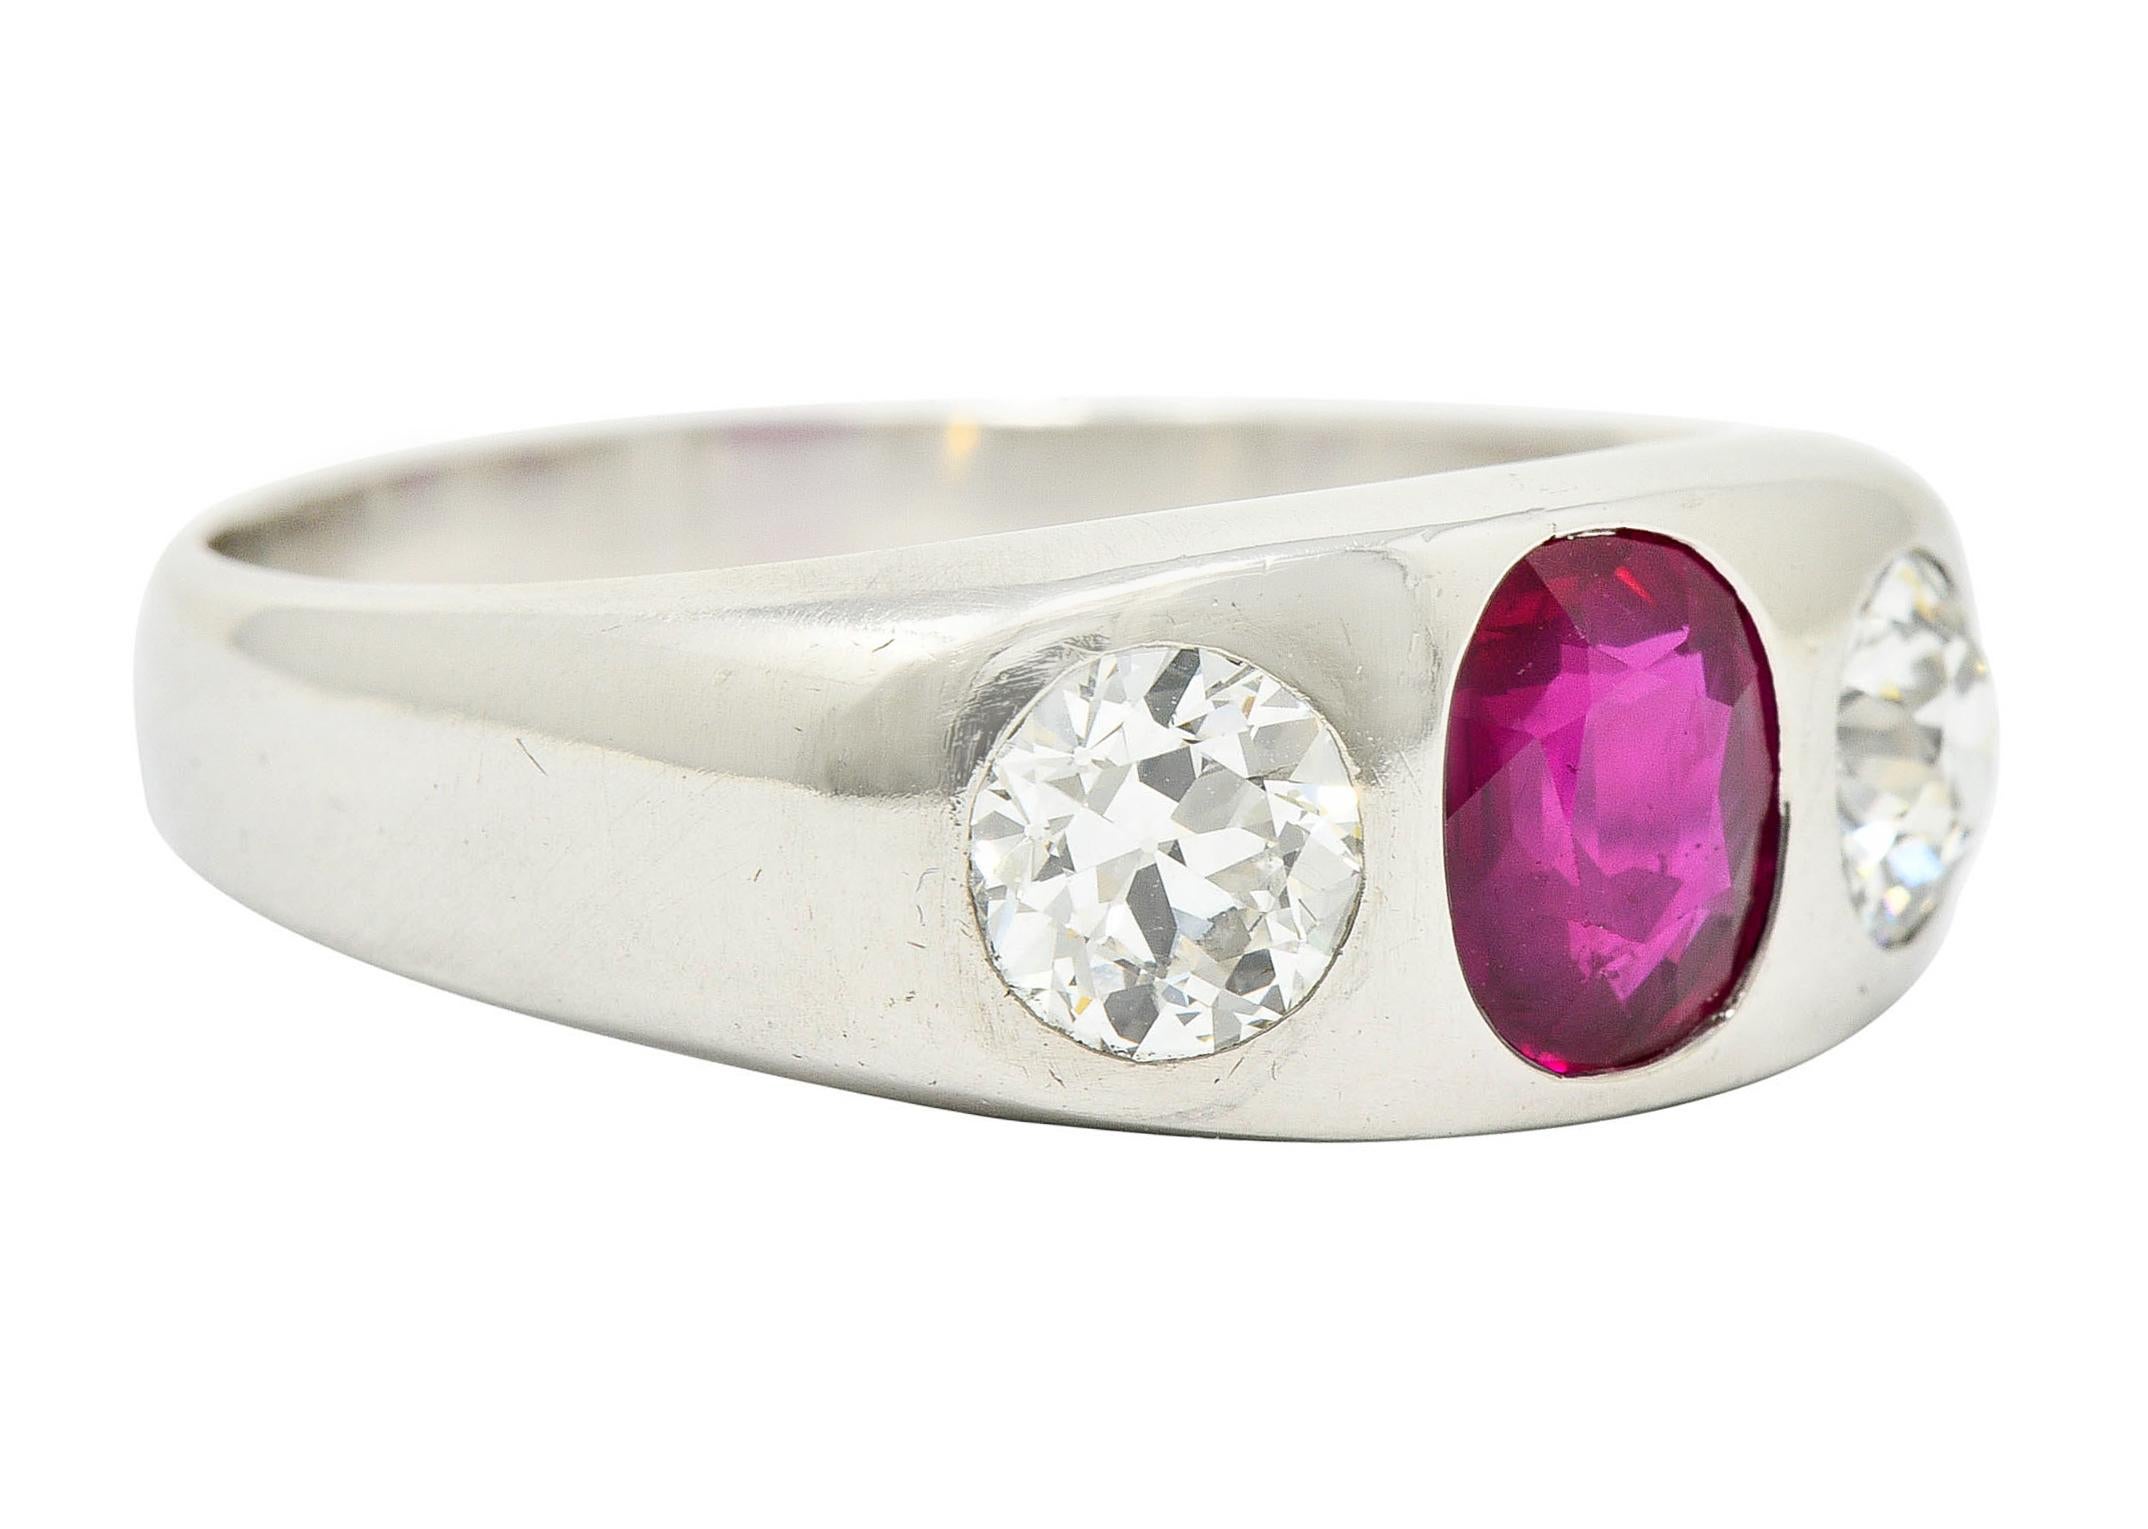 Gypsy style ring centers a flush set oval cut Burma ruby

Weighing 1.89 carats with bright purplish red color and no indications of heat

Flanked by two flush set transitional cut diamonds

Weighing in total approximately 1.50 carats with I/J color